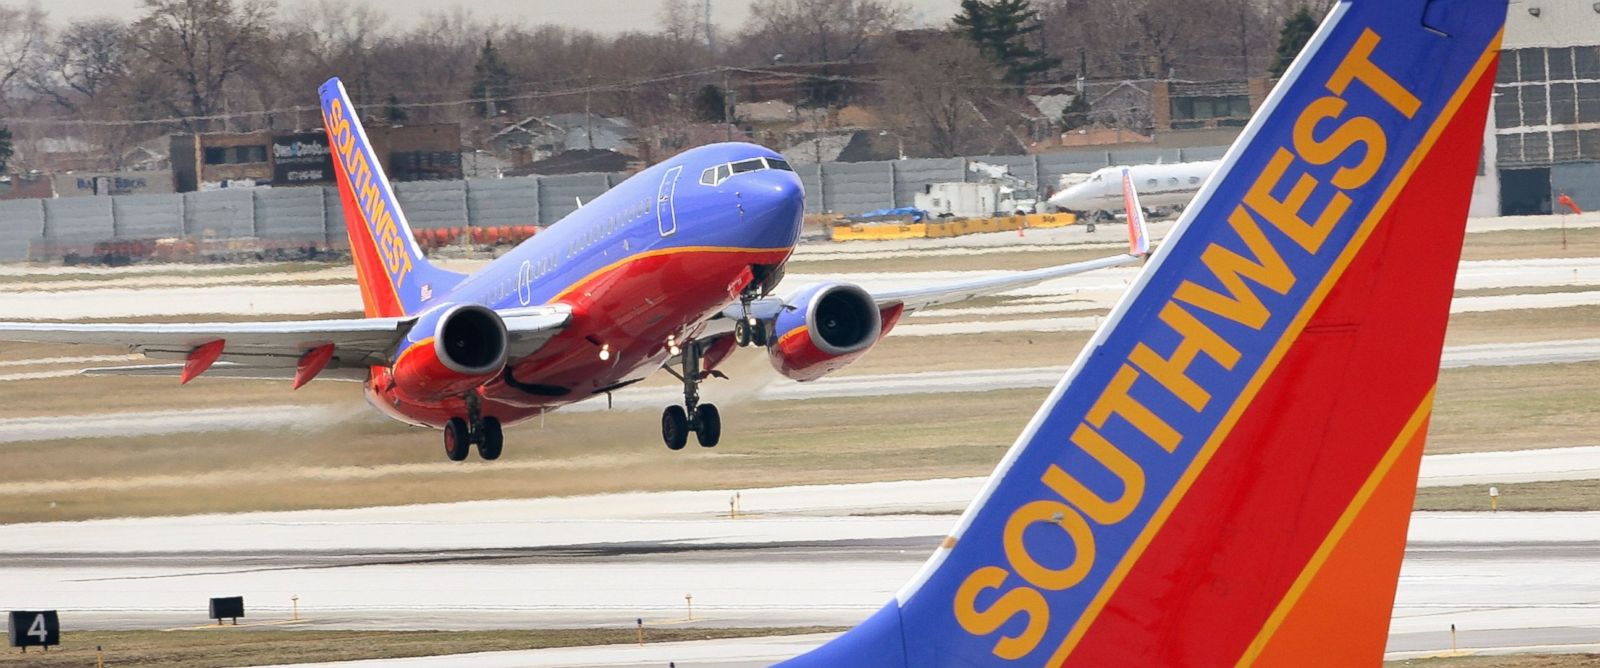 southwest airlines check in policy